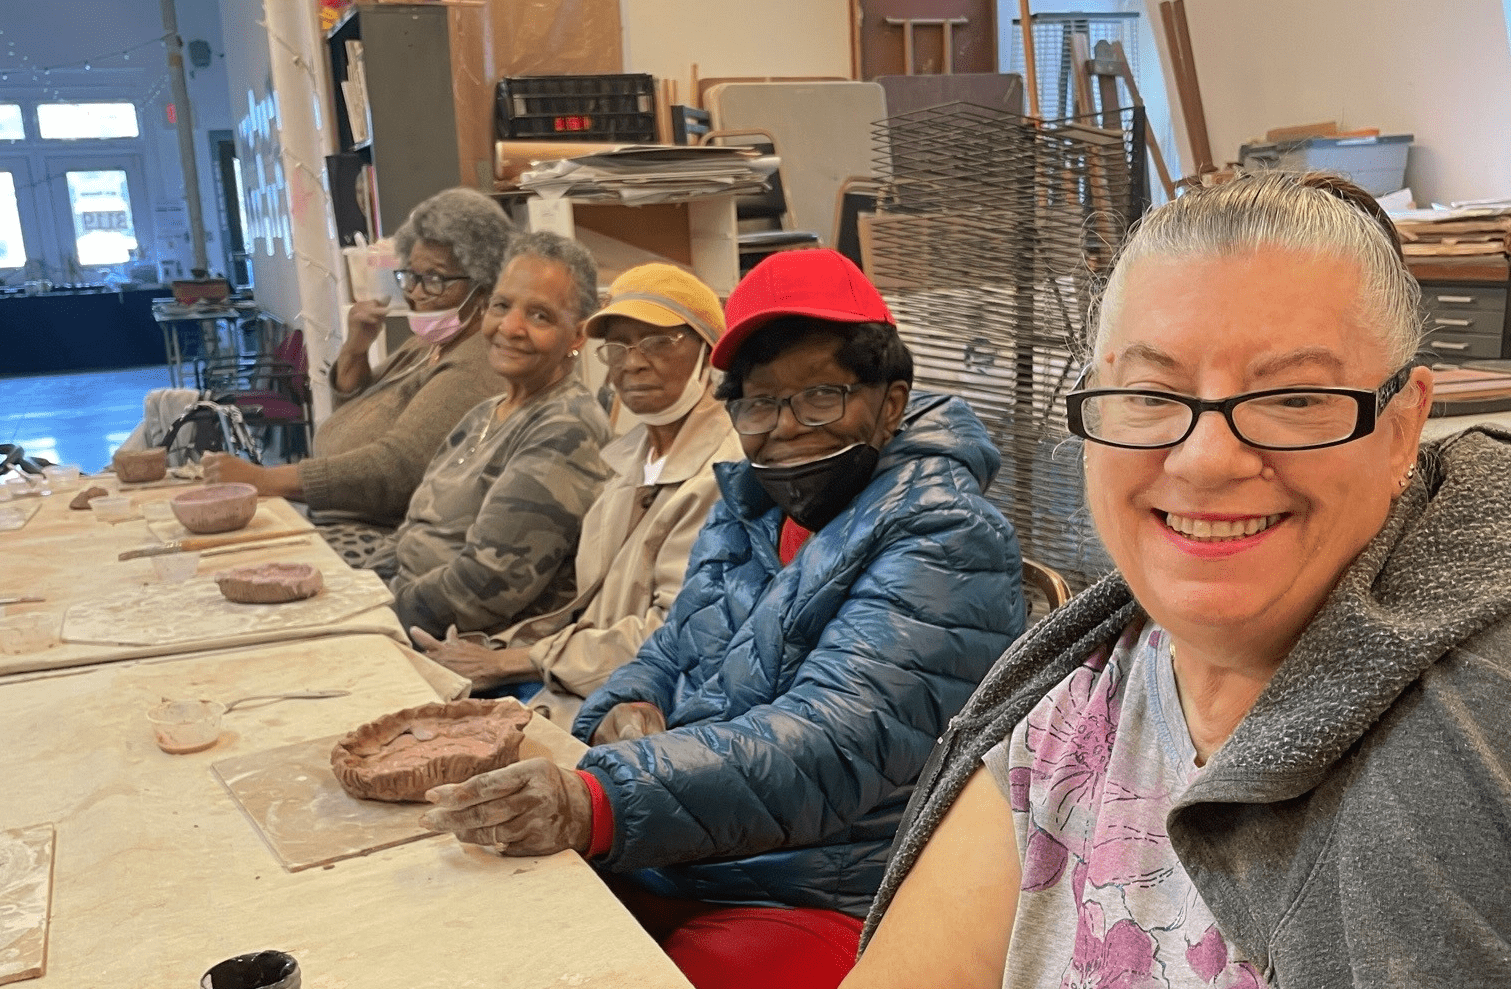 Five seniors participating in ceramics class at the Rose Centers for Aging Well